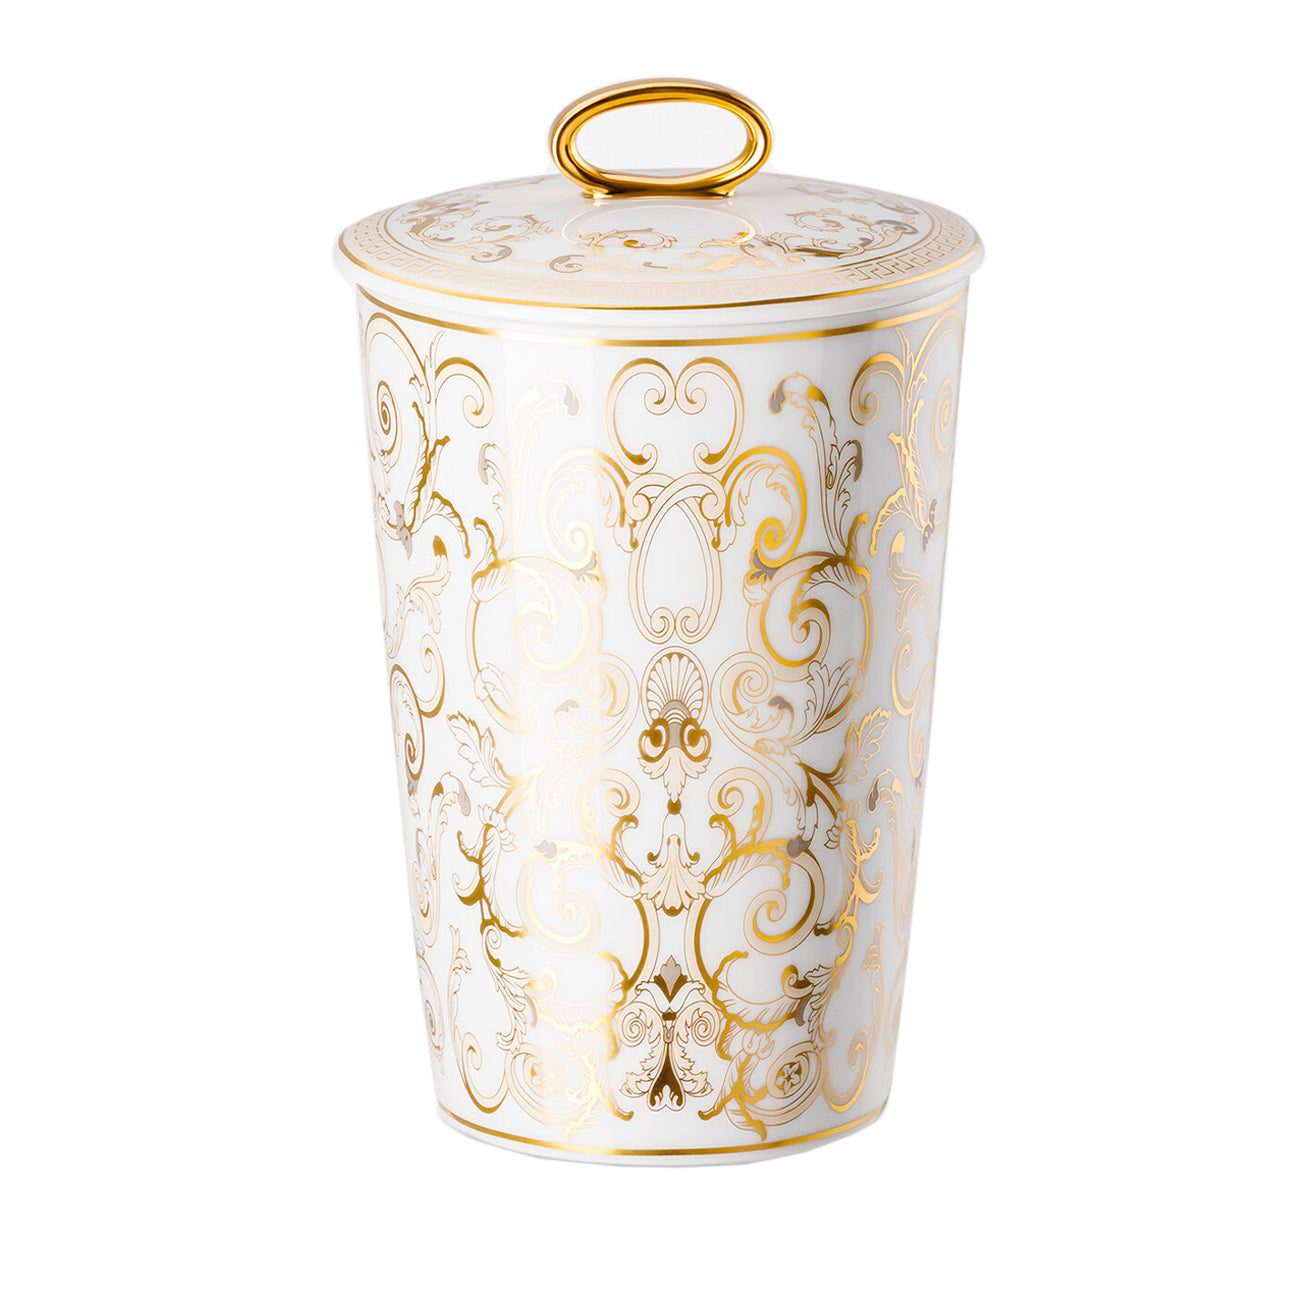 Versace Medusa Gala Scented Candle Pot, Versace - RSVP Style